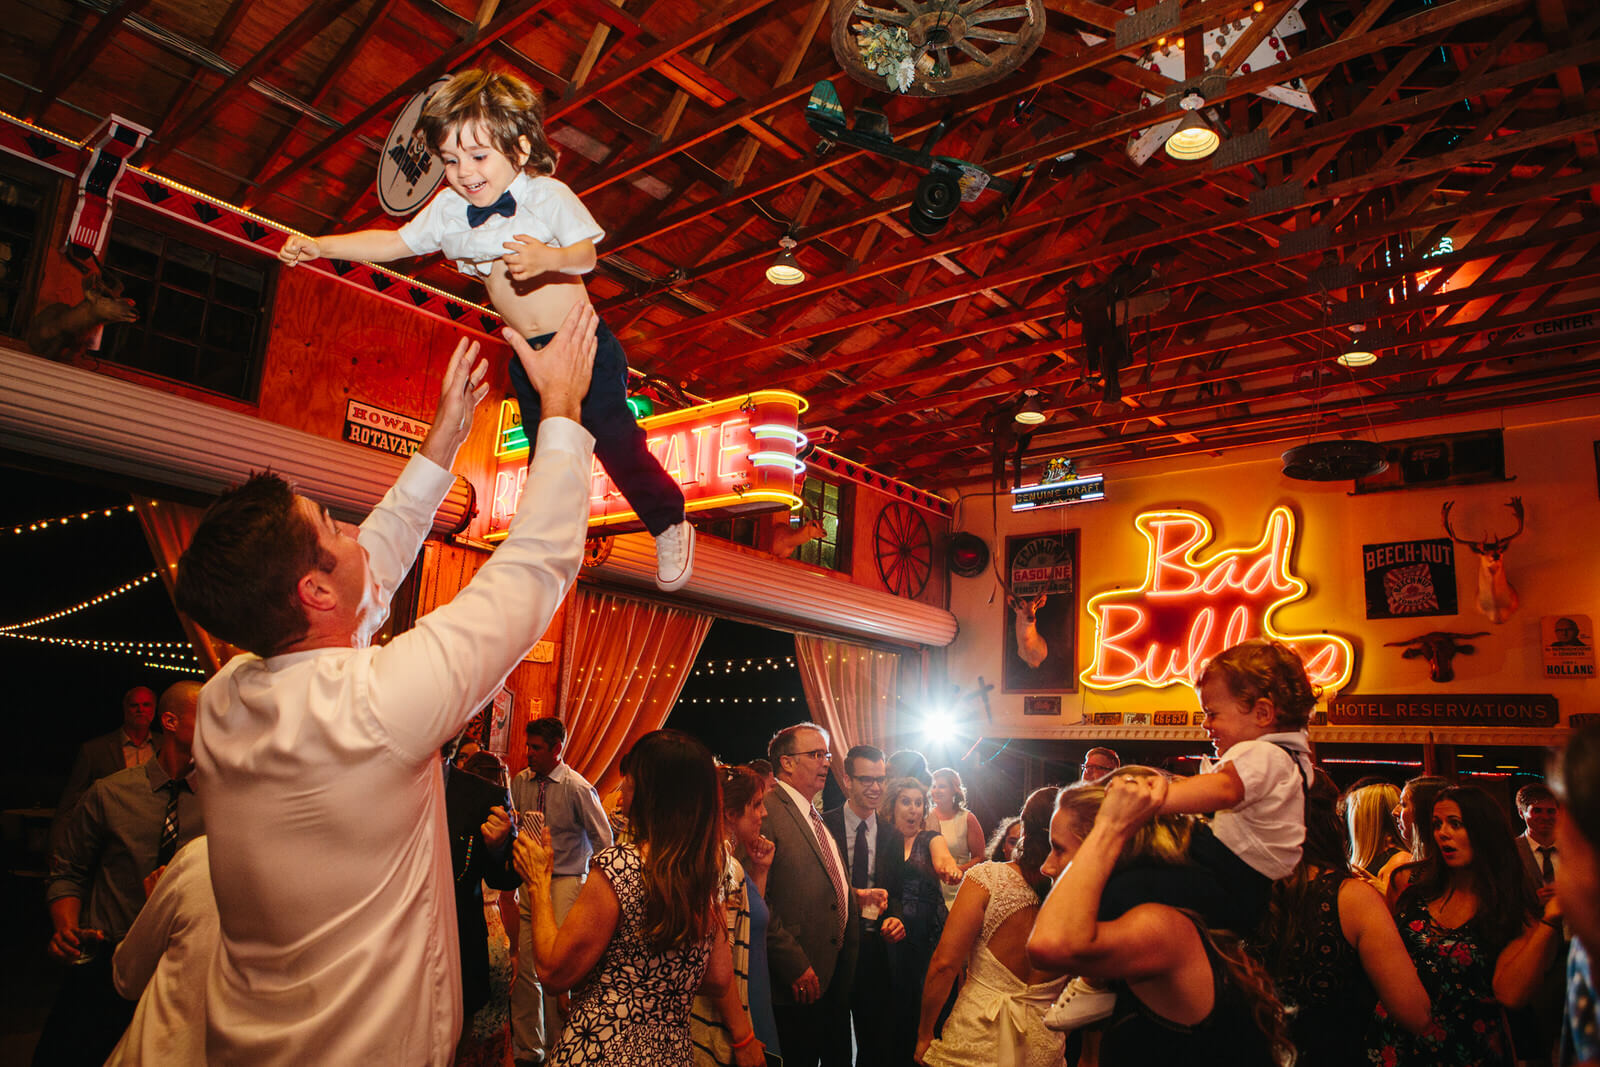 A small boy gets tossed into the air during a Holland Ranch wedding in San Luis Obispo California